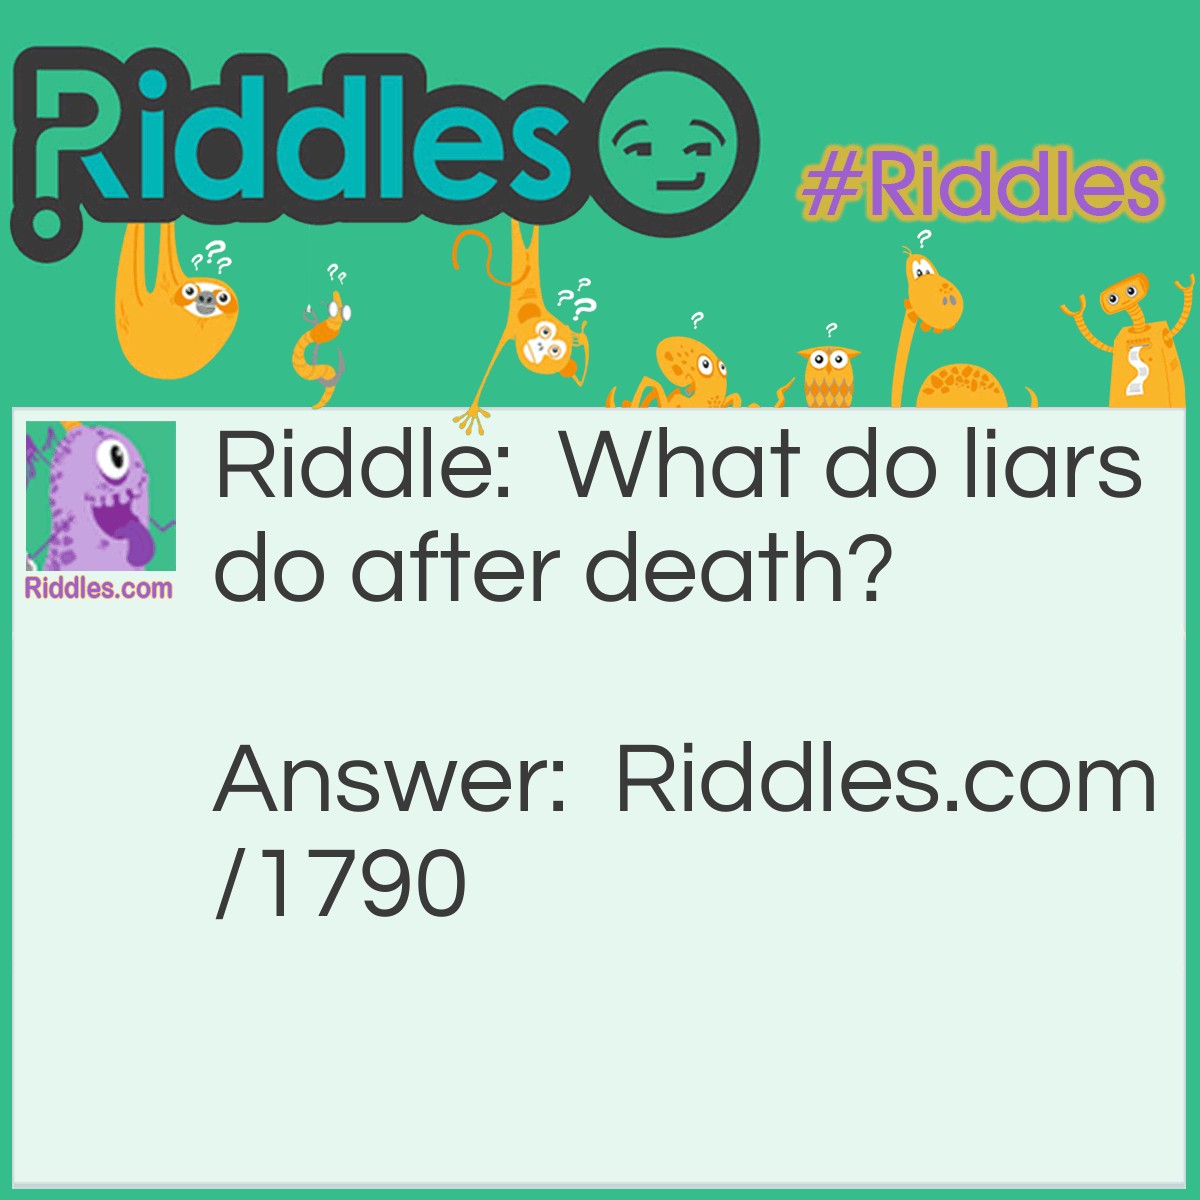 Riddle: What do liars do after death? Answer: Lie still.